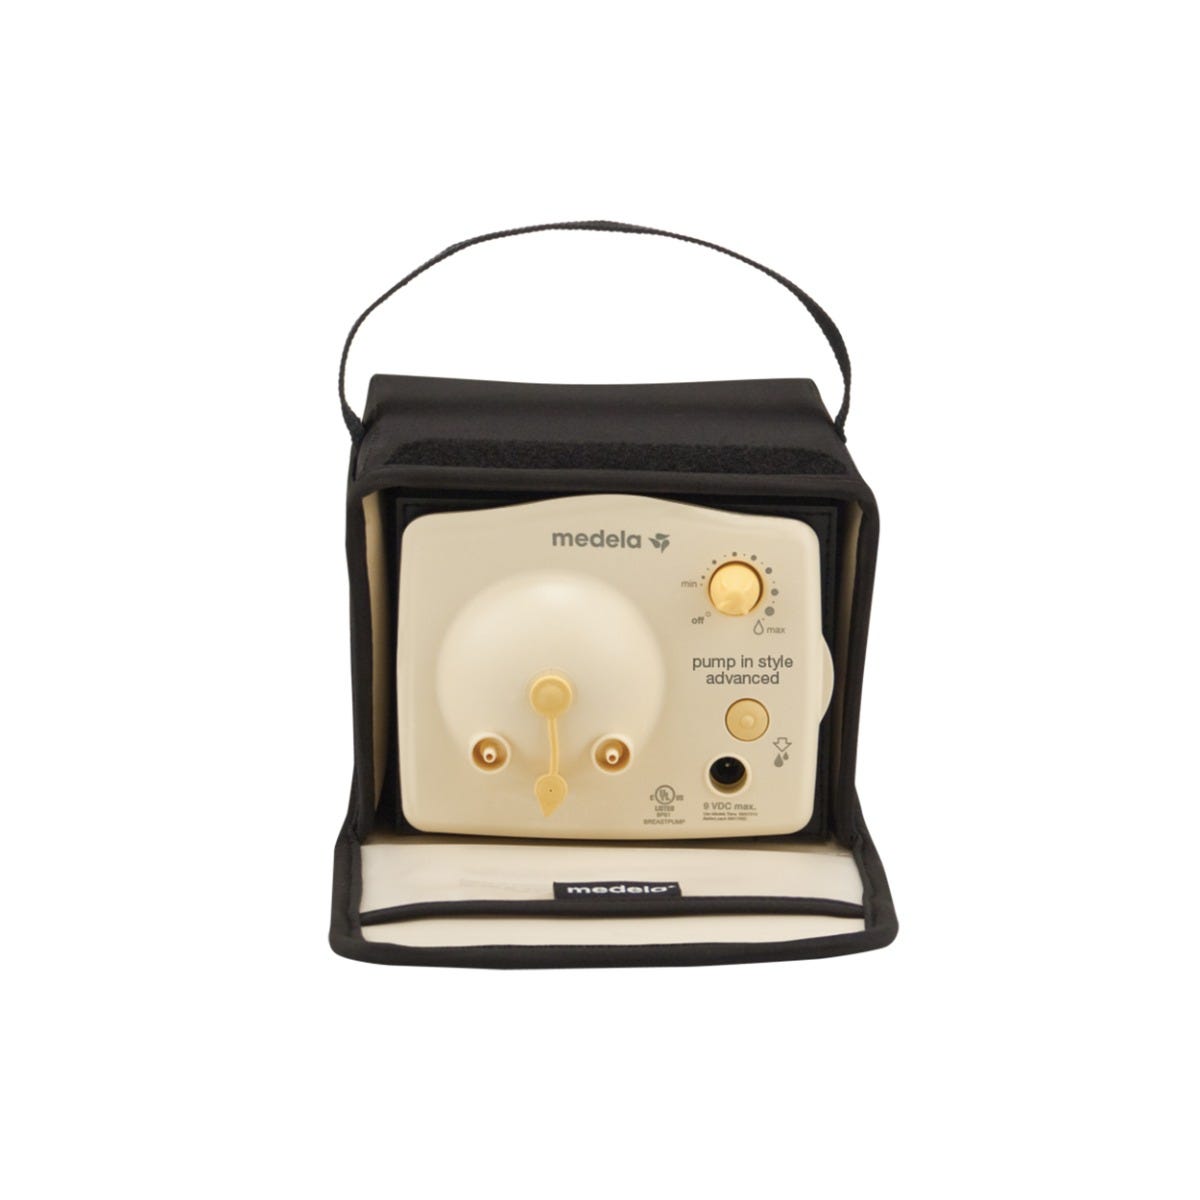 Medela Pump in Style Advanced Double Electric Breast Pump (Resupply)